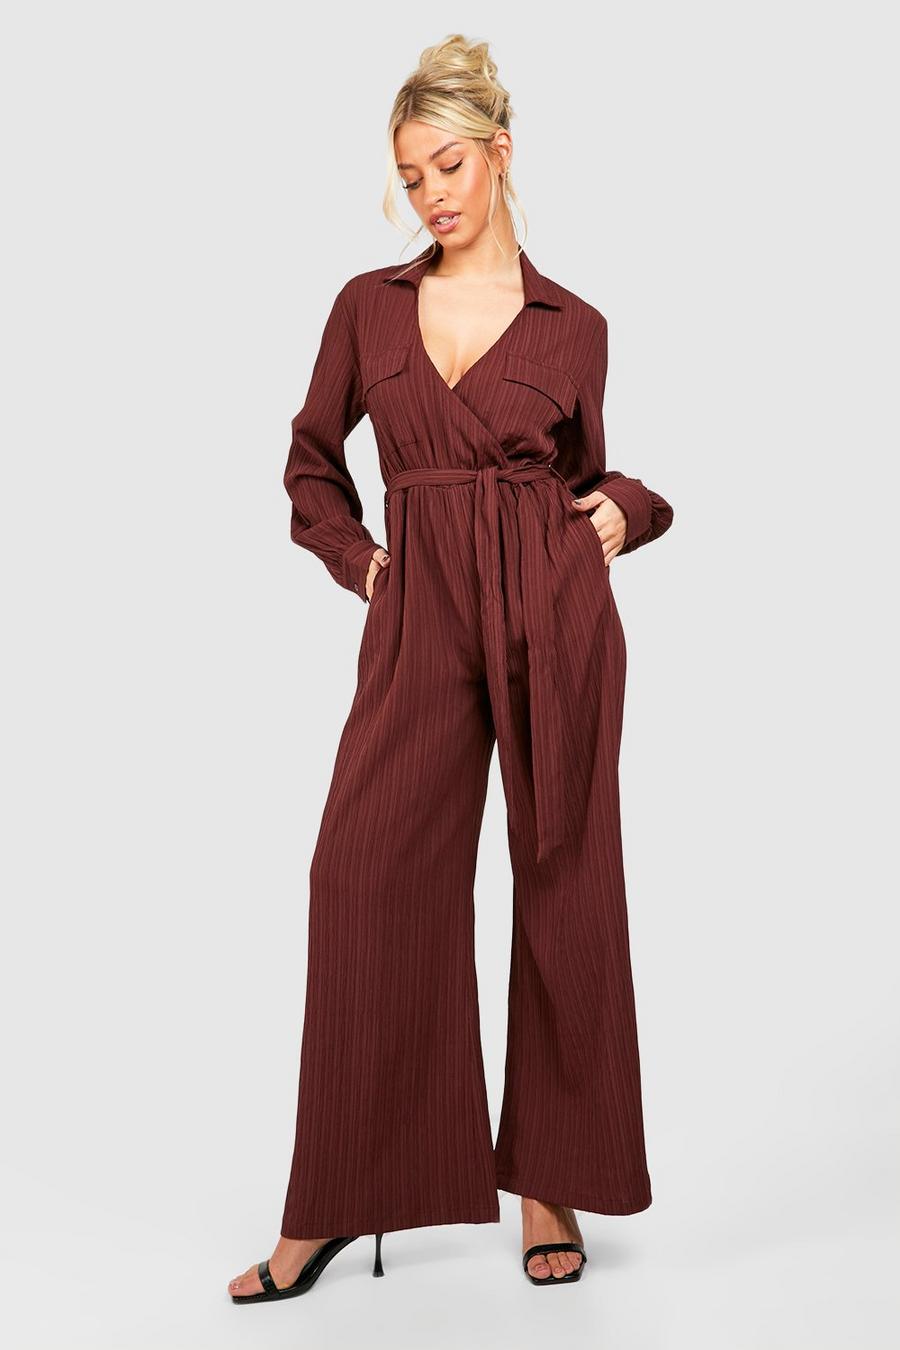 Chocolate brown Textured Utility Wide Leg Jumpsuit